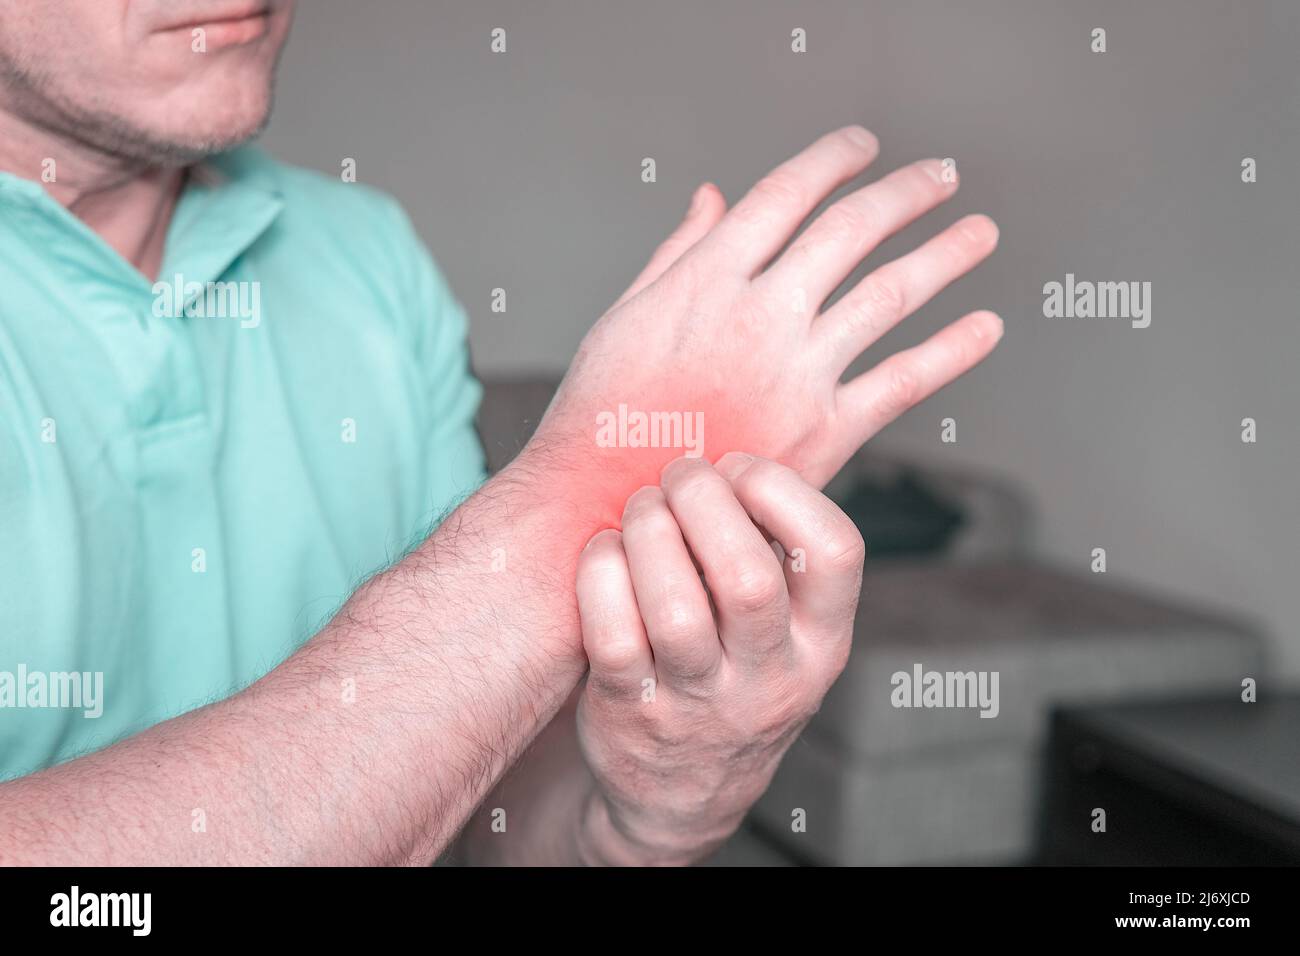 The concept of dermatitis, eczema, allergies, psoriasis. A man scratching an itchy hand. Close-up of a man with an itchy rash on his arm, the affected Stock Photo